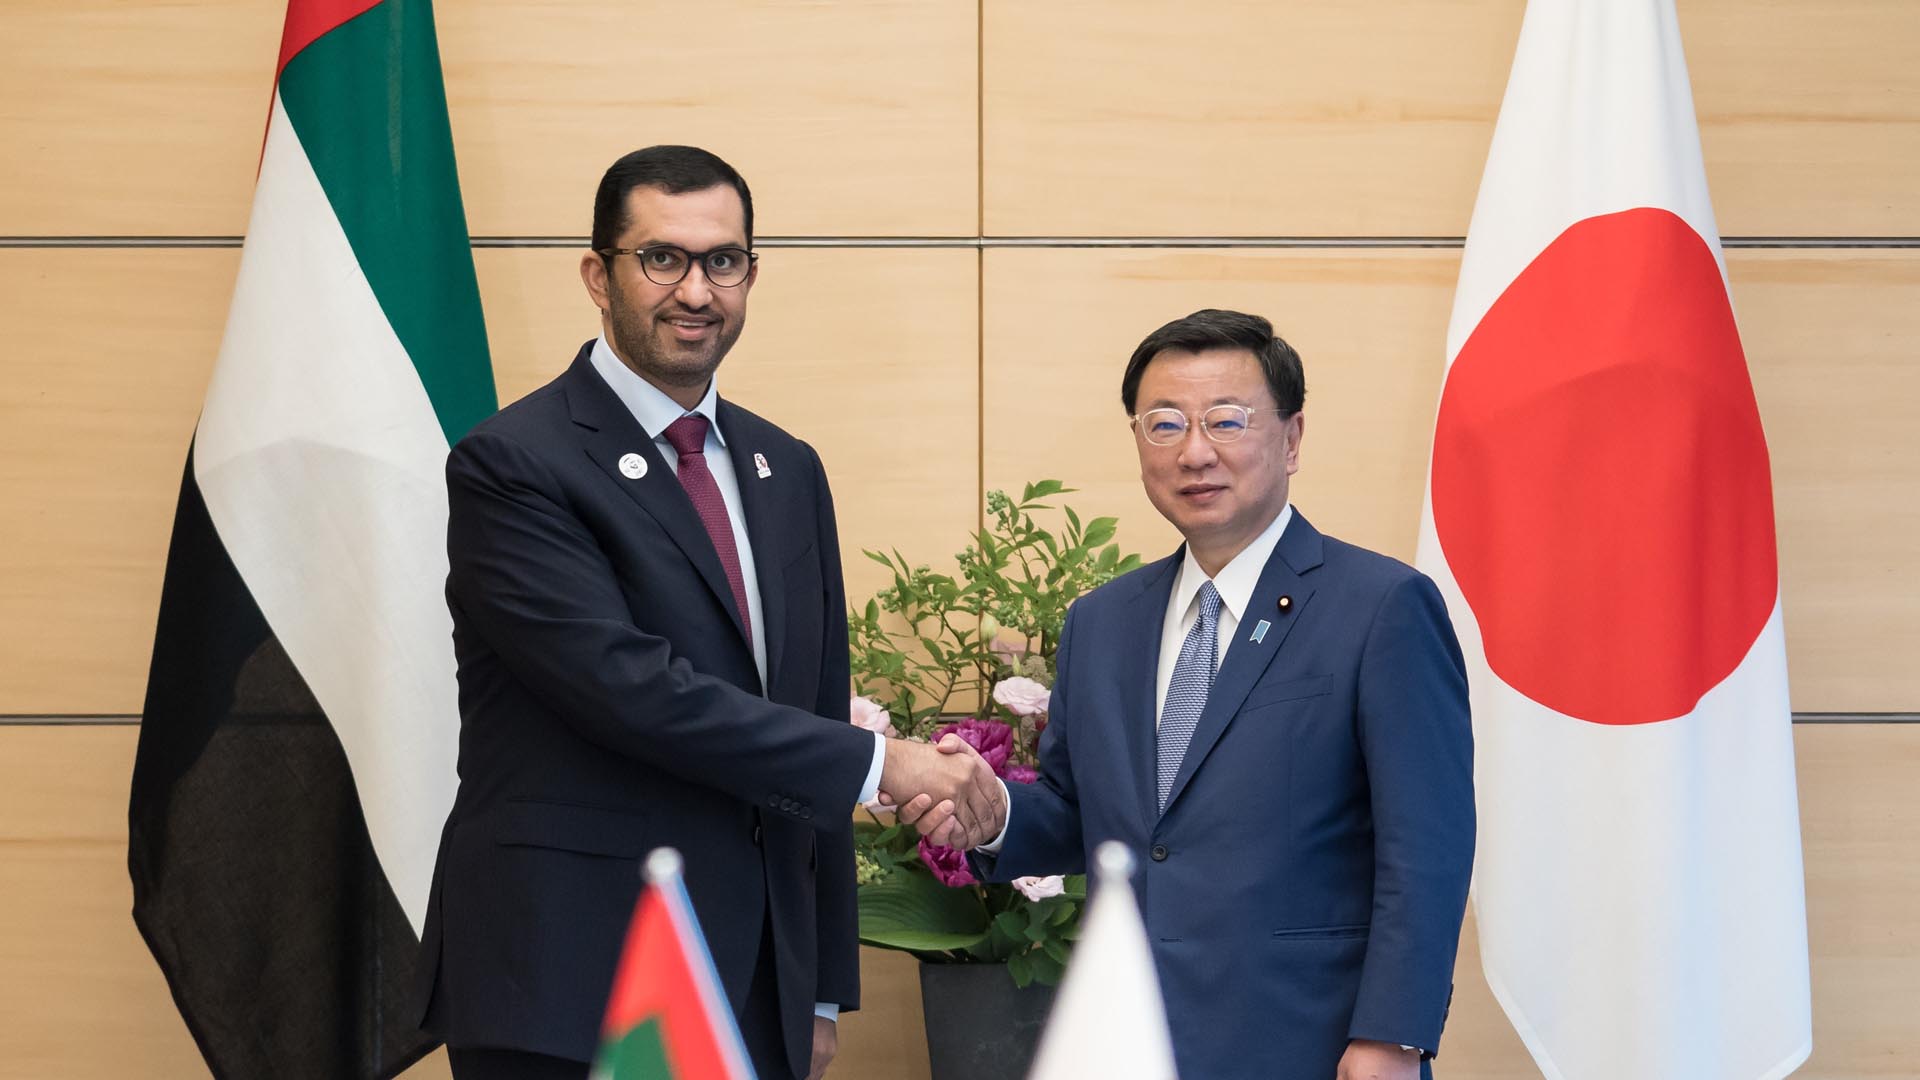 Co-operation between UAE and Japan on energy, economy, and industry